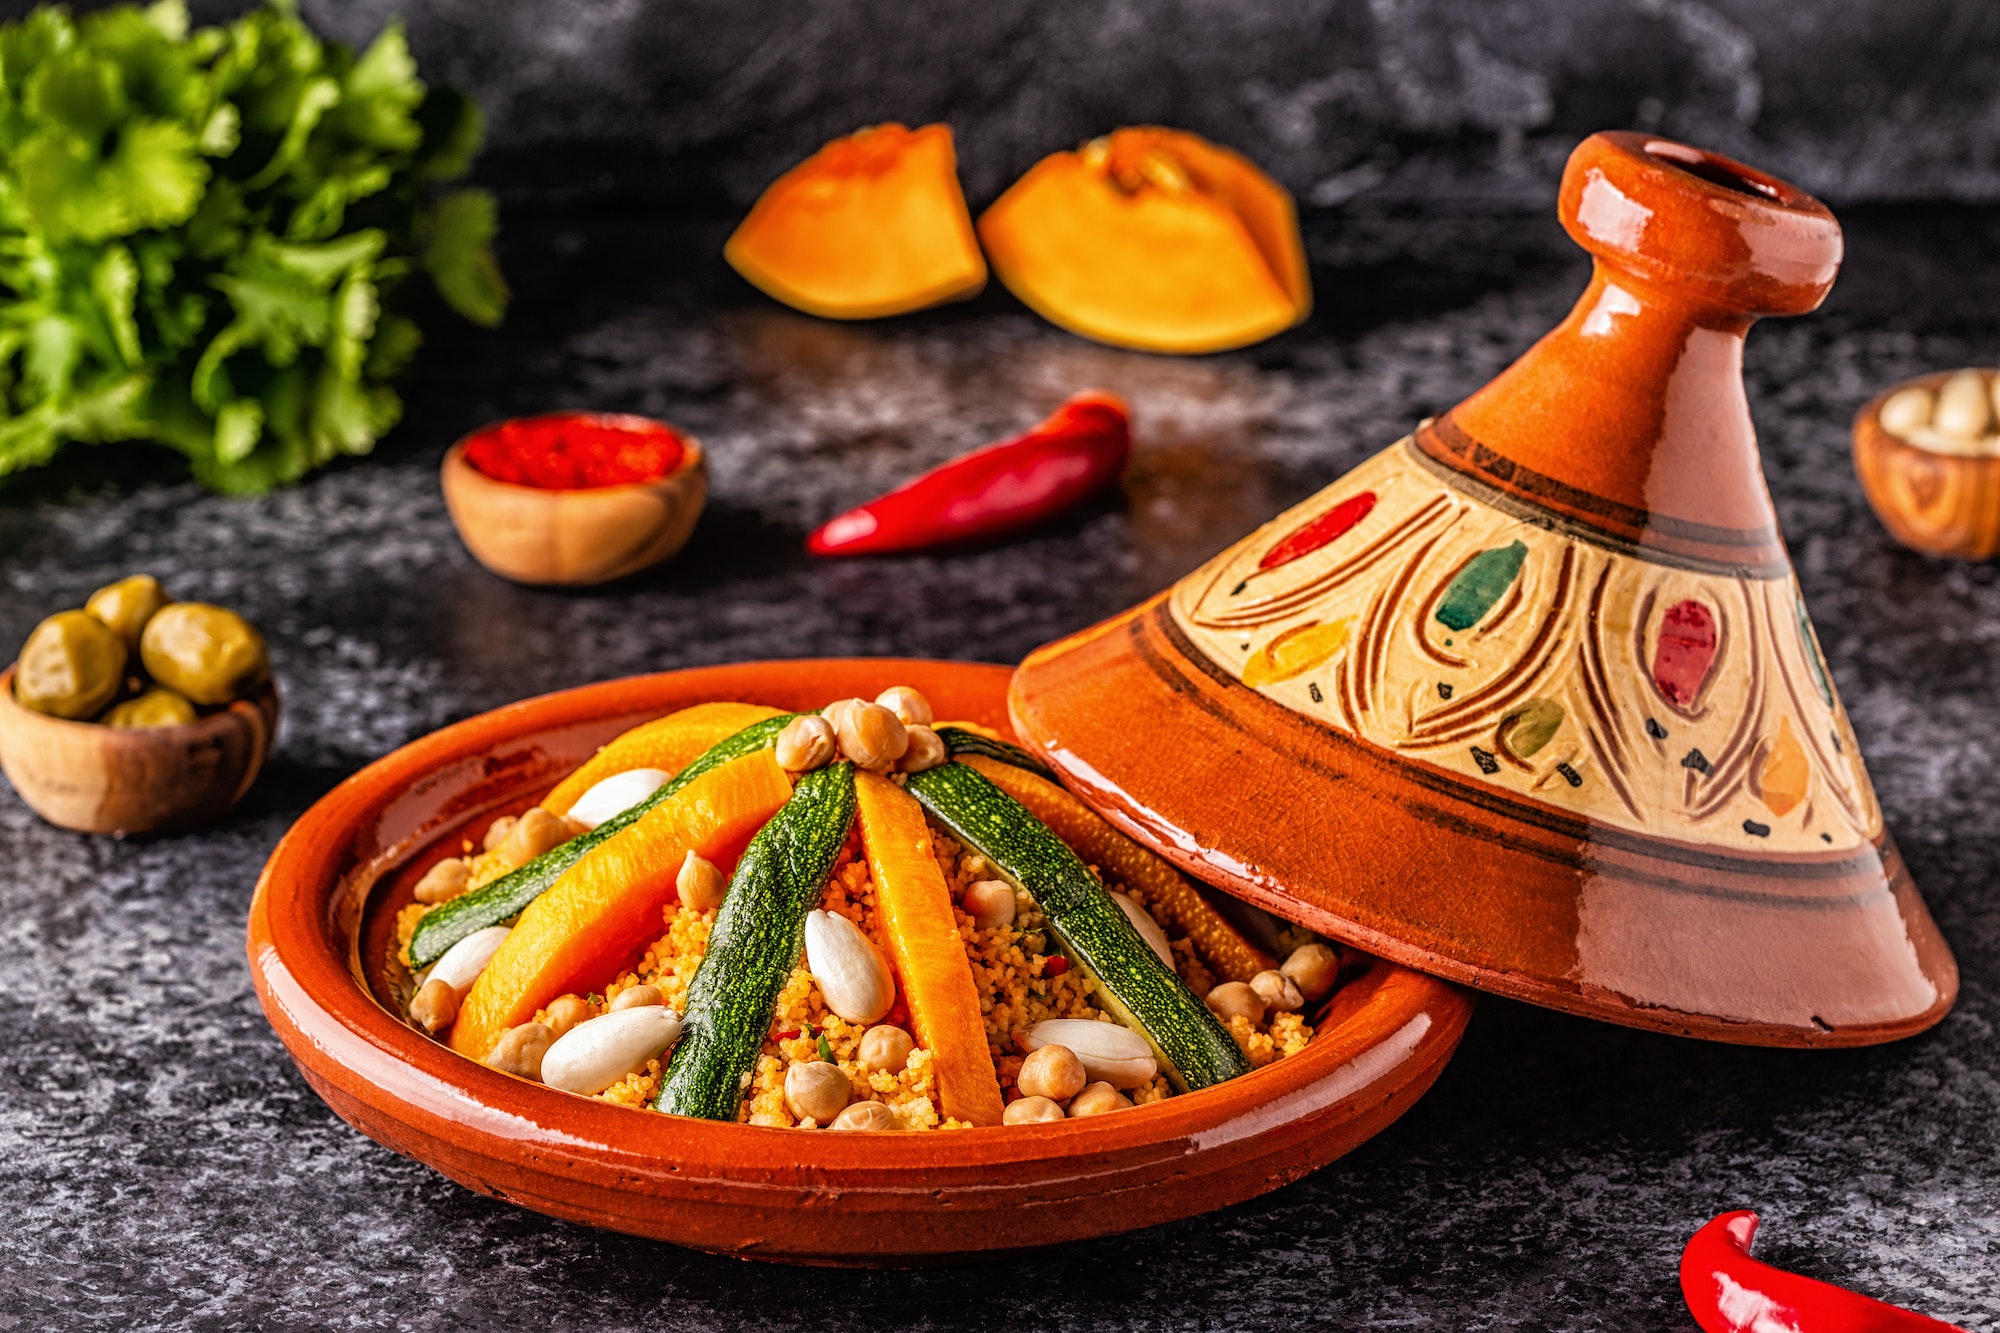 Moroccan tagine : so much flavours !